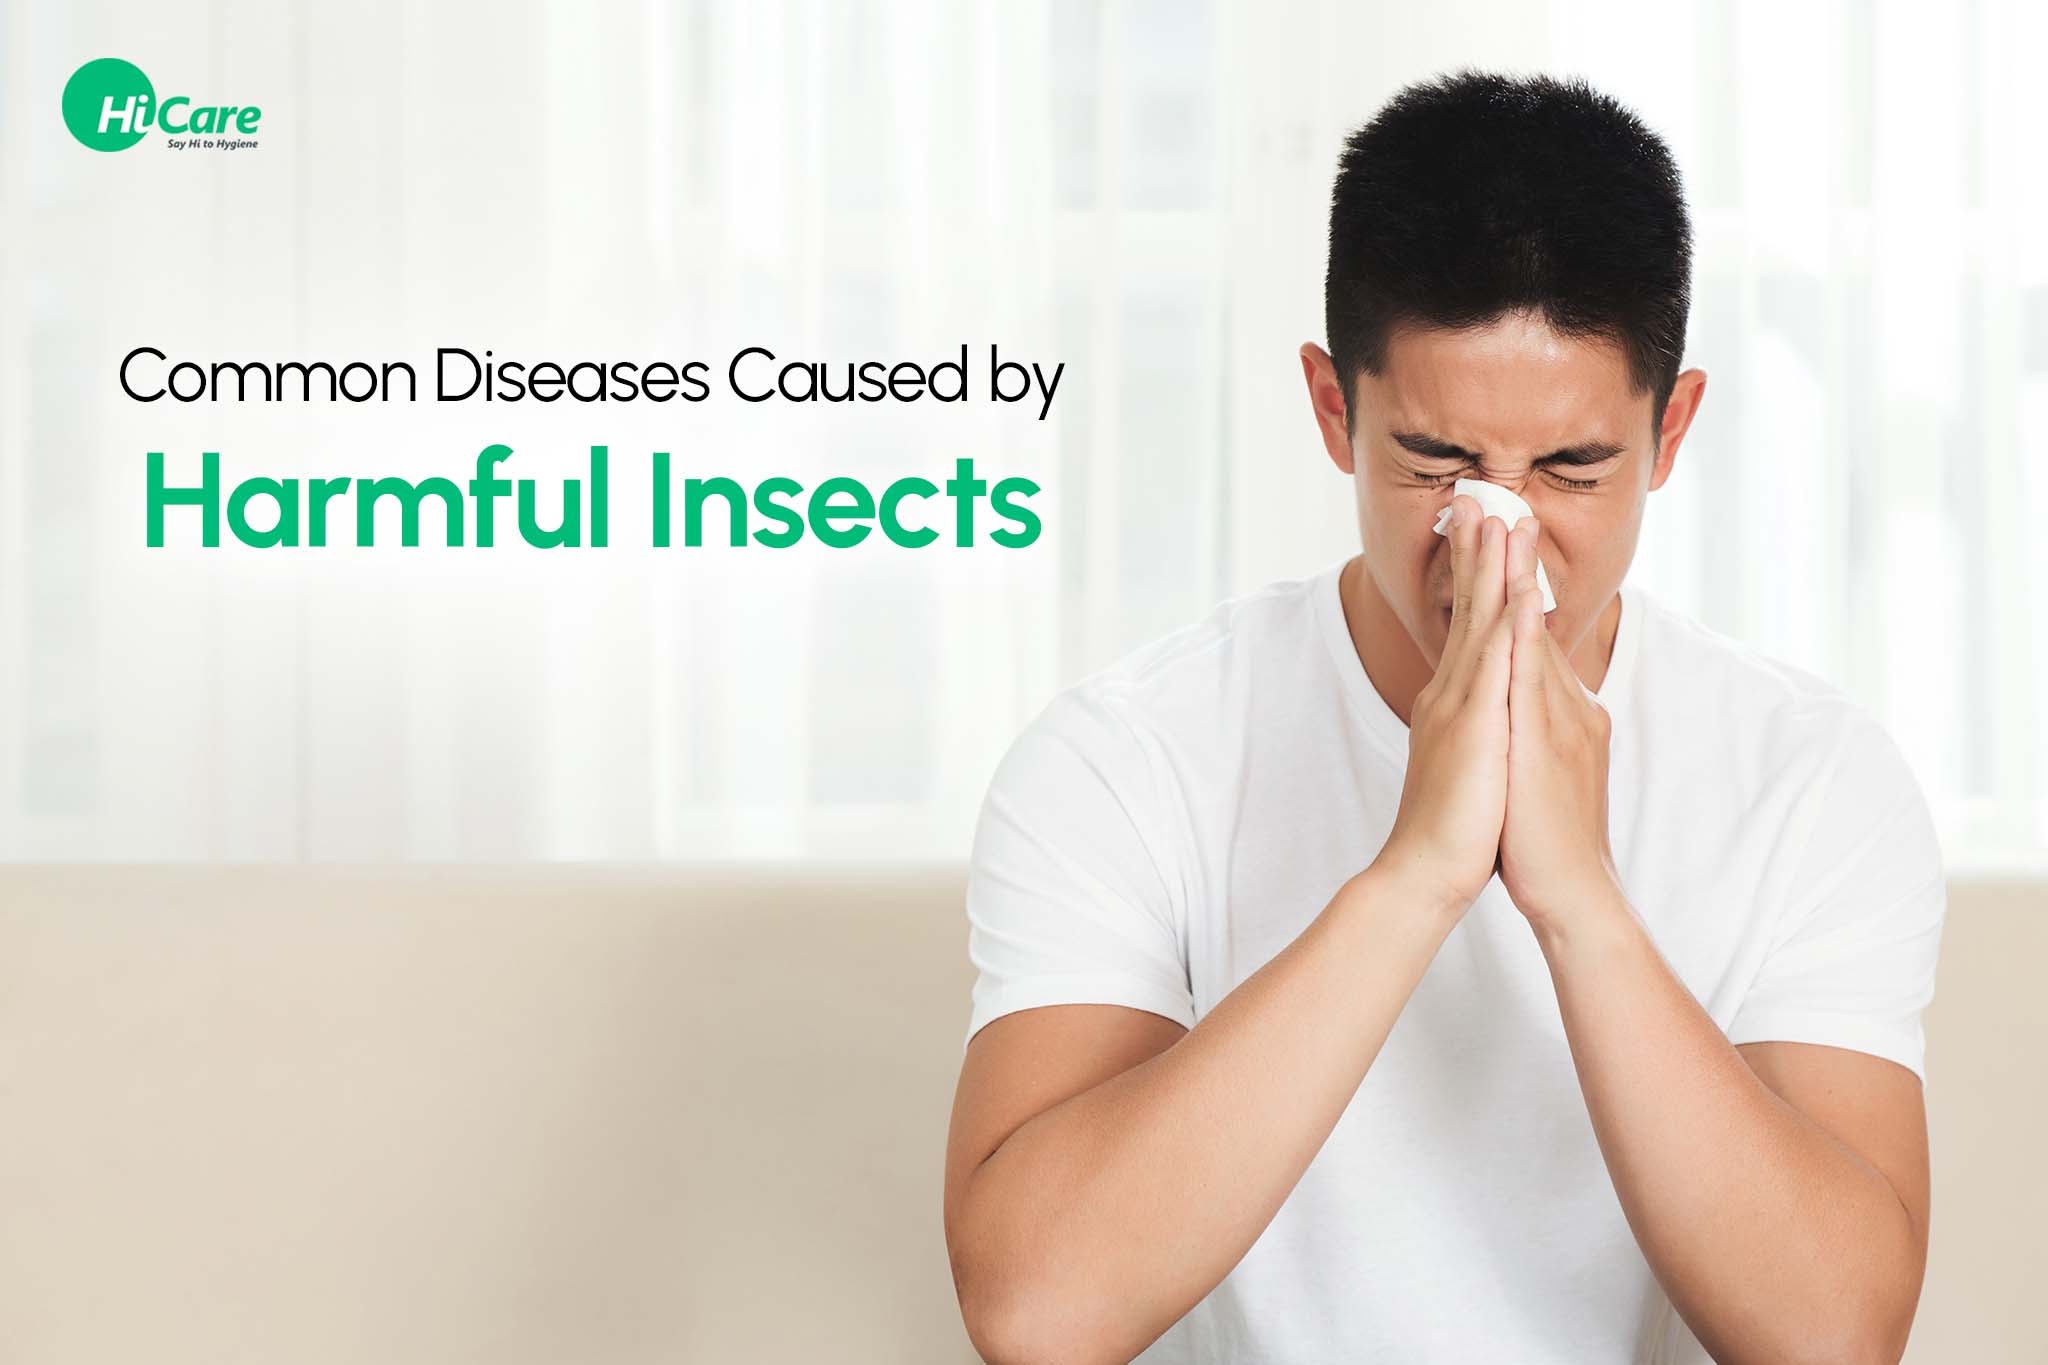 Common Diseases Caused by Harmful Insects